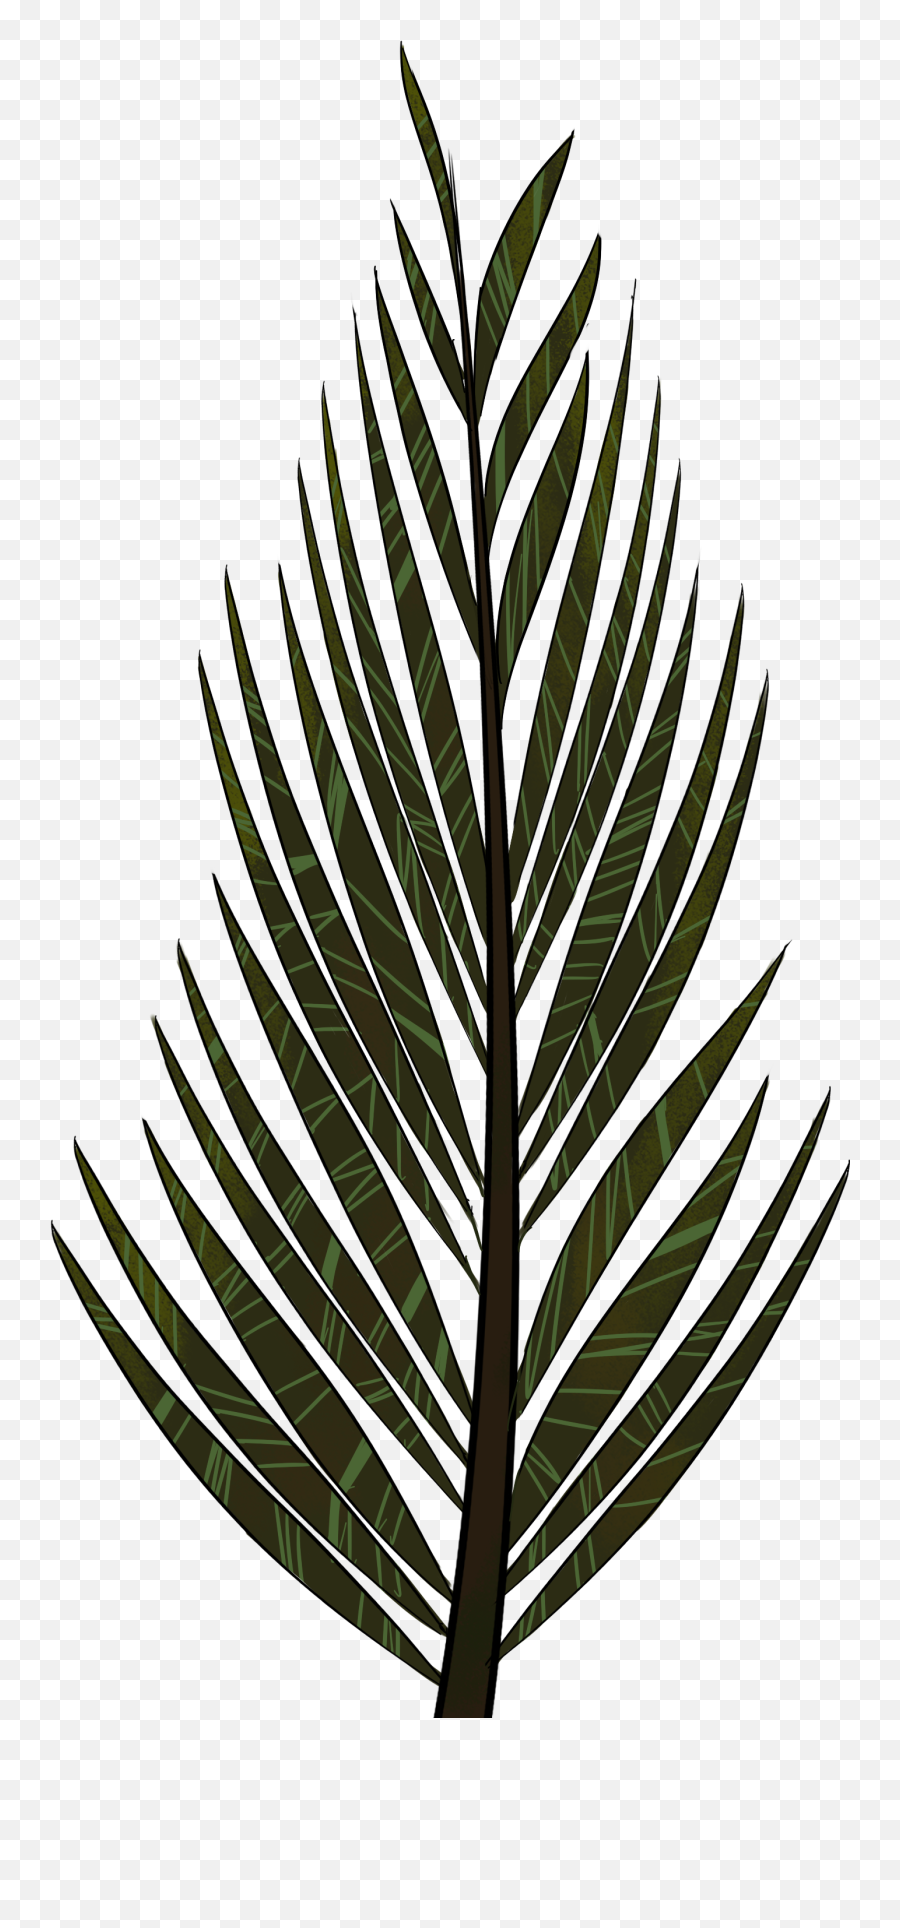 Rain Plants And Trees Clipart Png 5 Station - Pine Tree Leaf Clipart,Palm Tree Clip Art Png